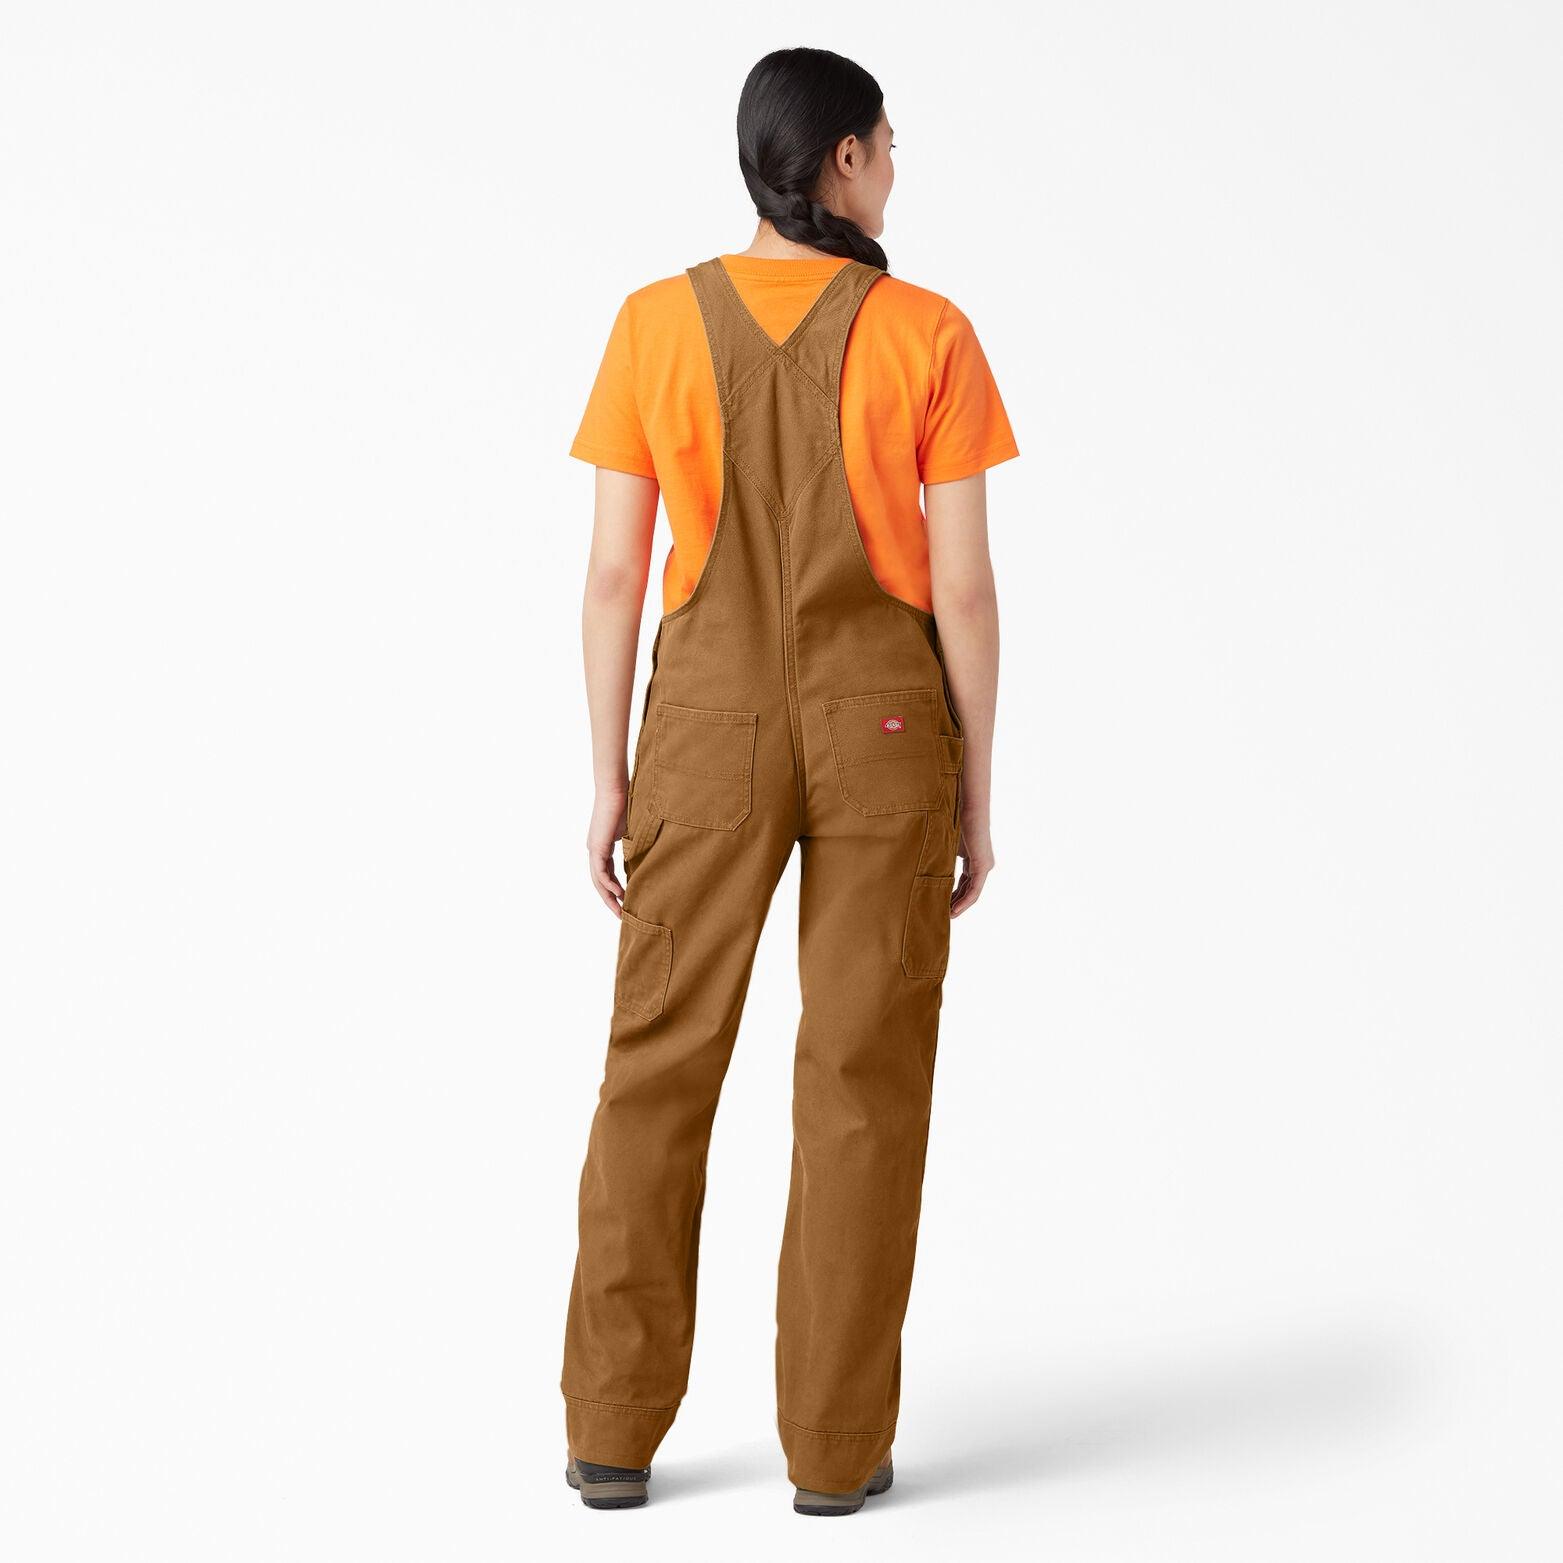 Women's Relaxed Fit Bib Overalls - Rinsed Brown Duck